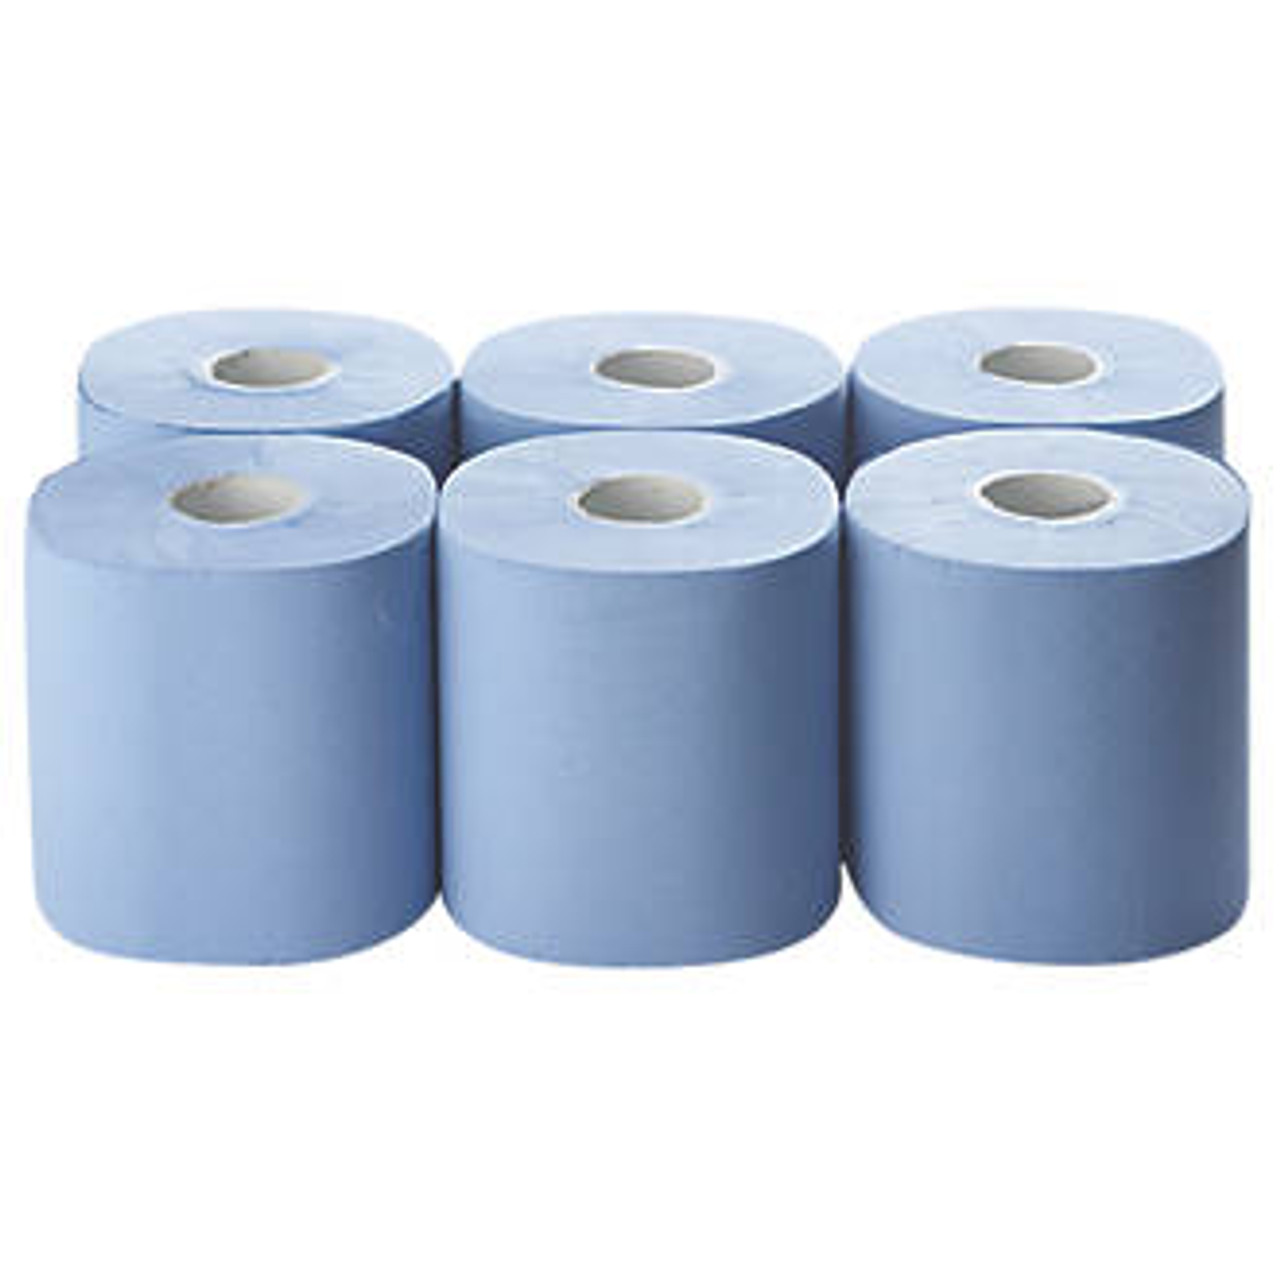 Picture of 1 Ply Blue centre feed rolls, 6x300mm rolls. 852544